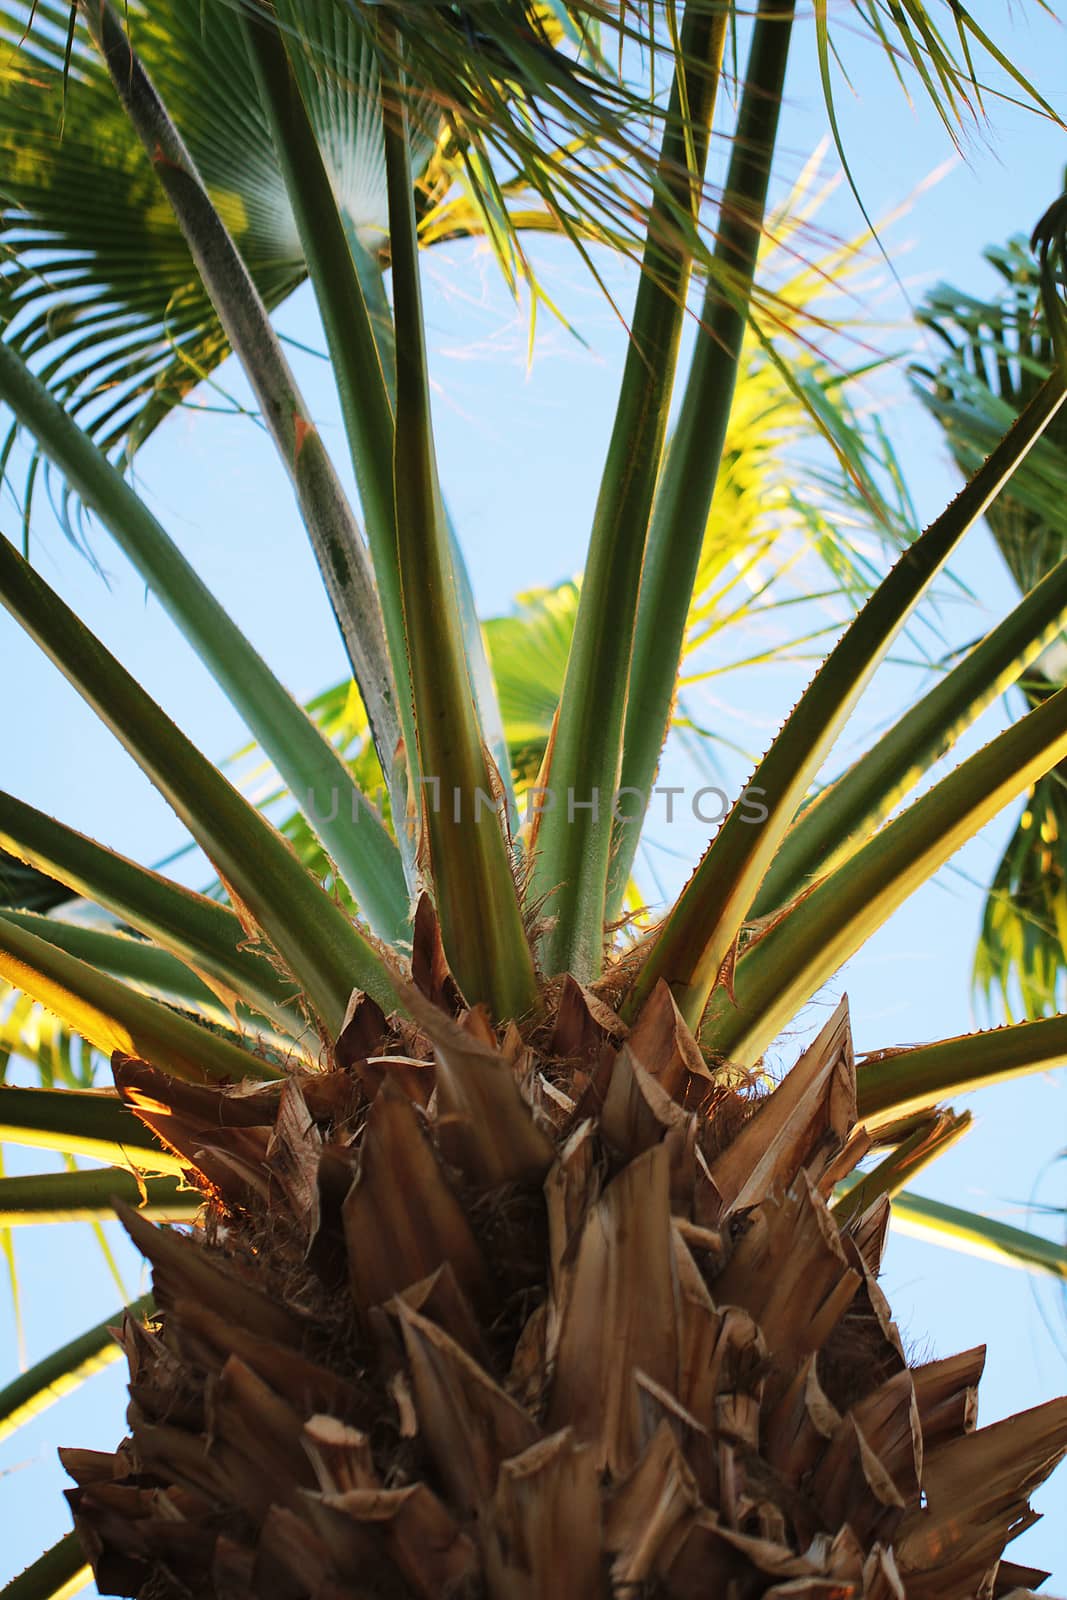 Date palm close up photo by Voinakh